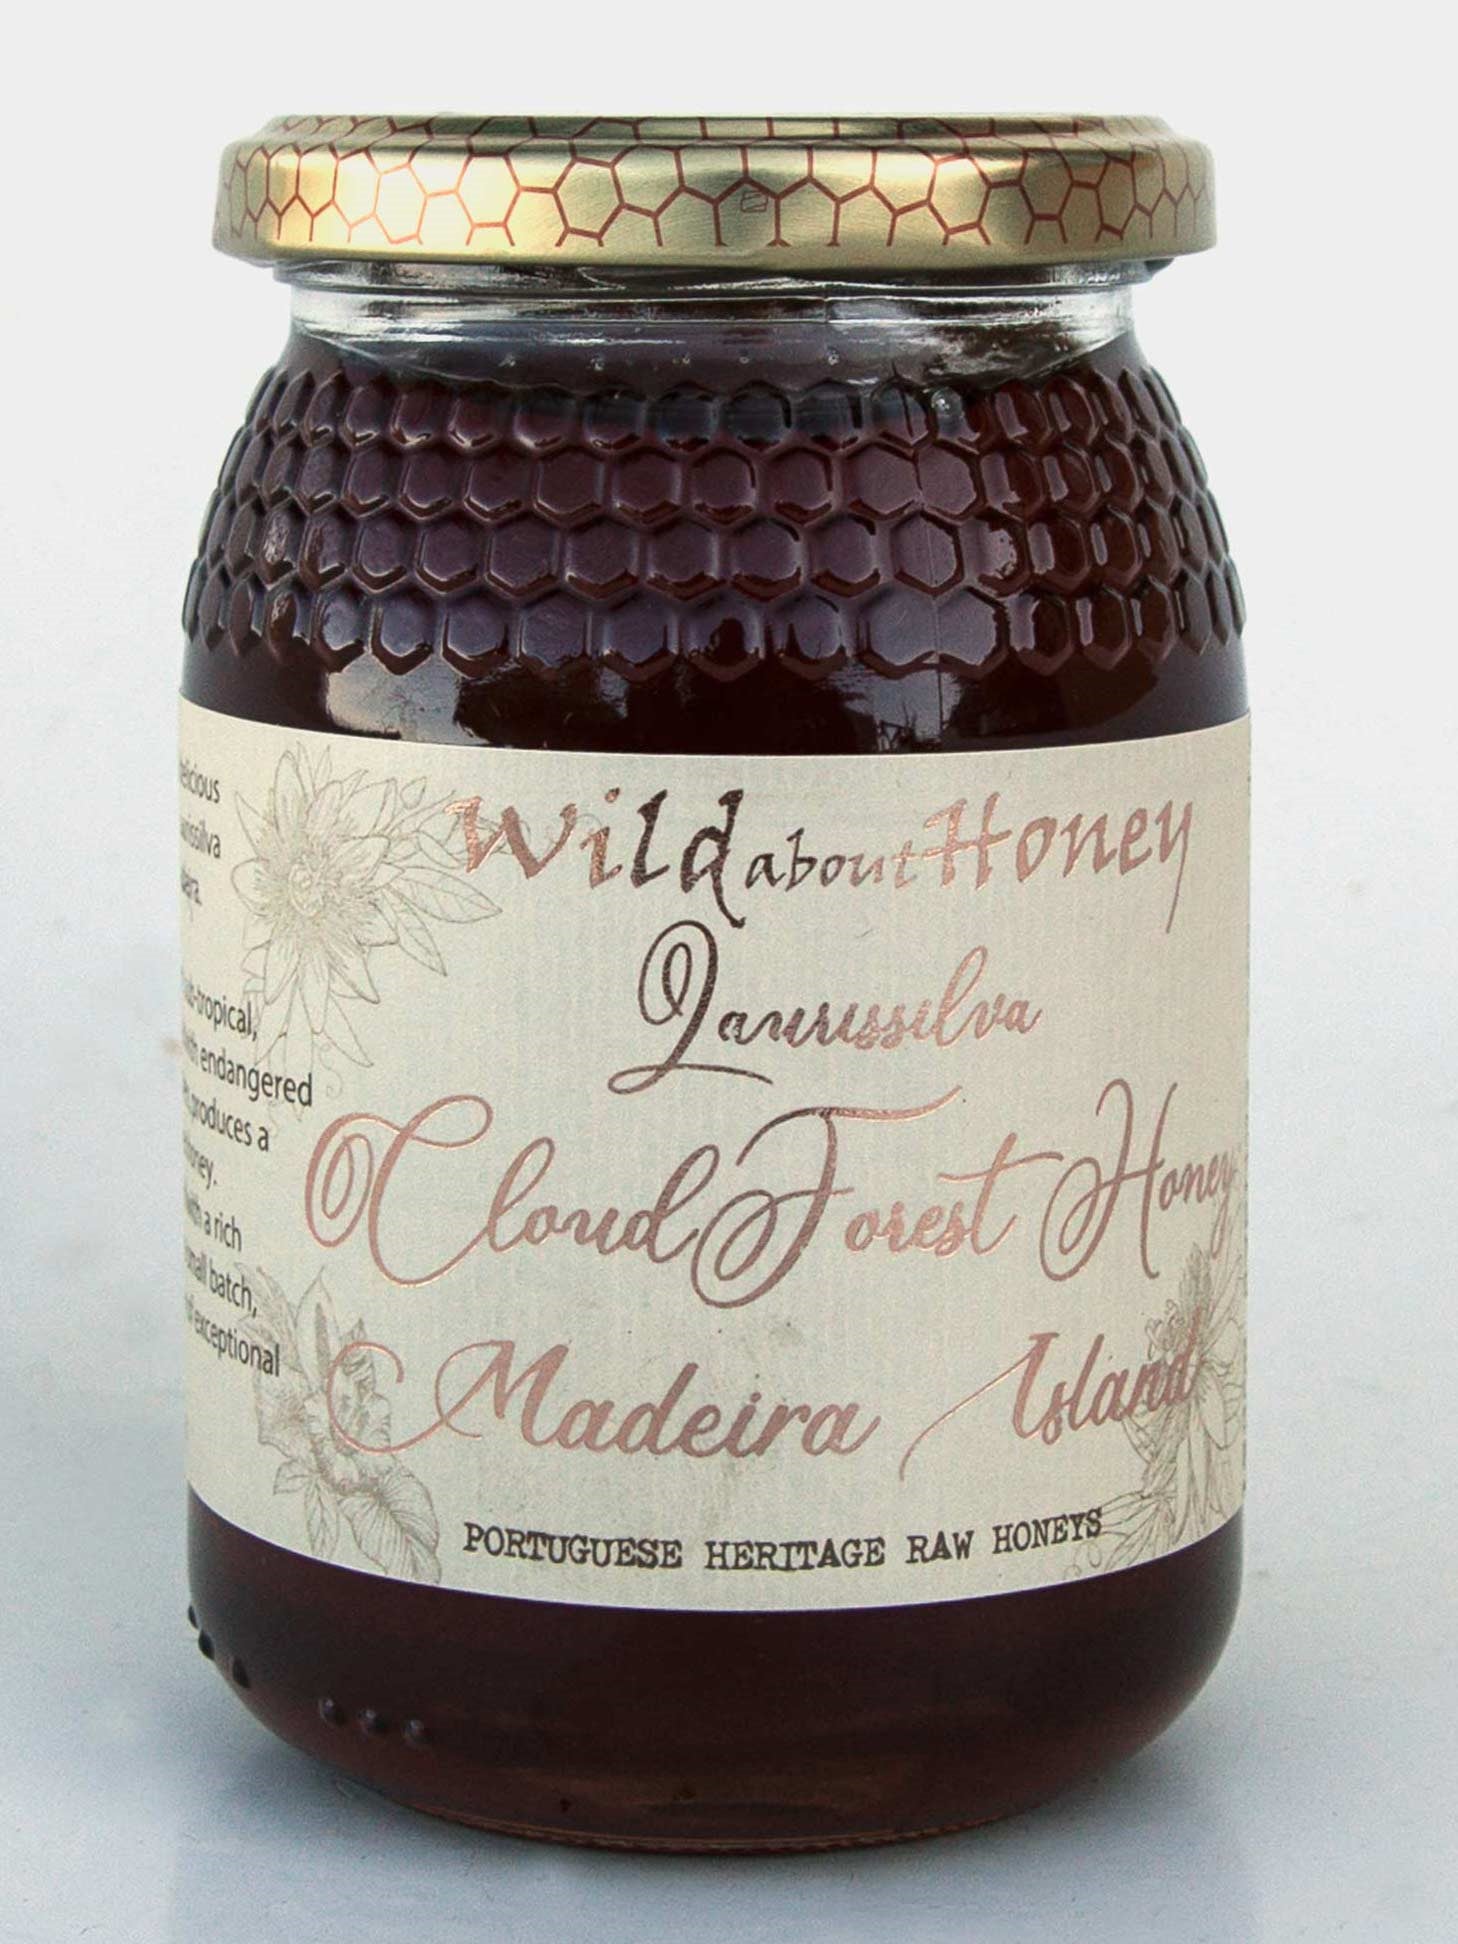 Laurissilva Cloud Forest Raw Honey from the Island of Madeira 500g